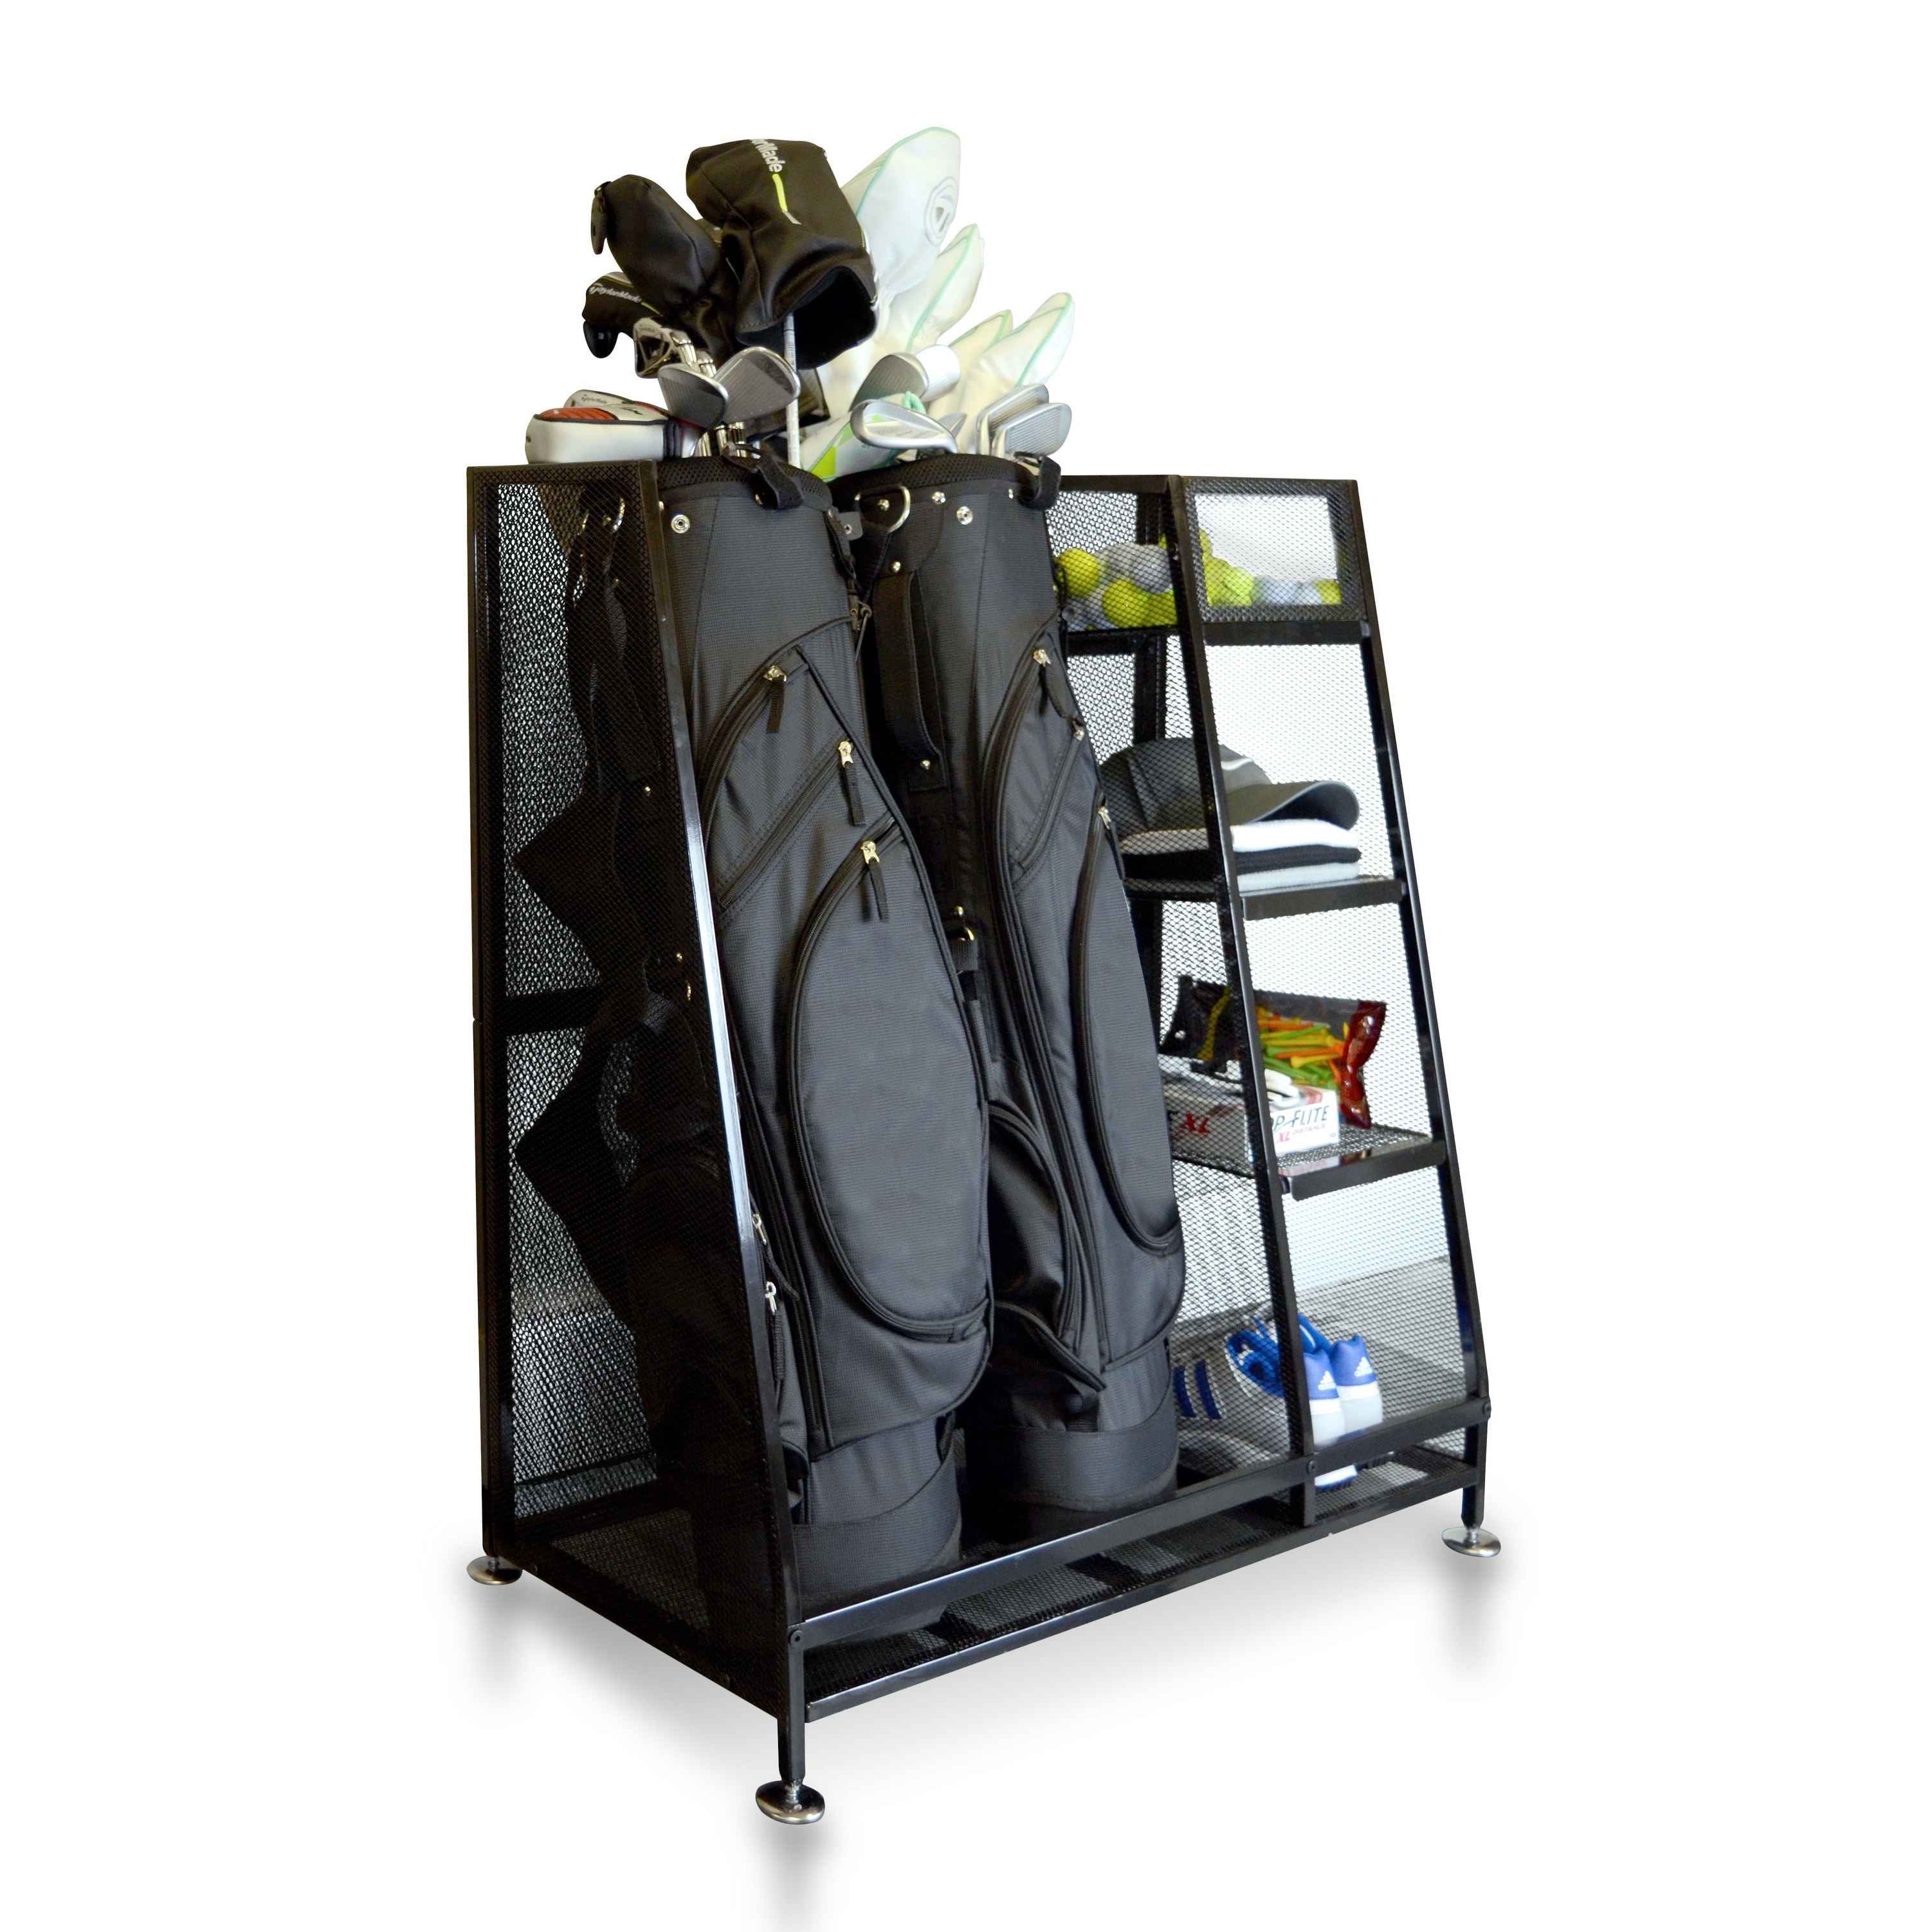 https://ak1.ostkcdn.com/images/products/25618669/Milliard-Golf-Organizer-Extra-Large-Size-Fit-2-Golf-Bags-and-Other-Golfing-Equipment-This-Handy-Storage-Rack-8437bb84-466e-4998-98d1-c7e675707ae7.jpg